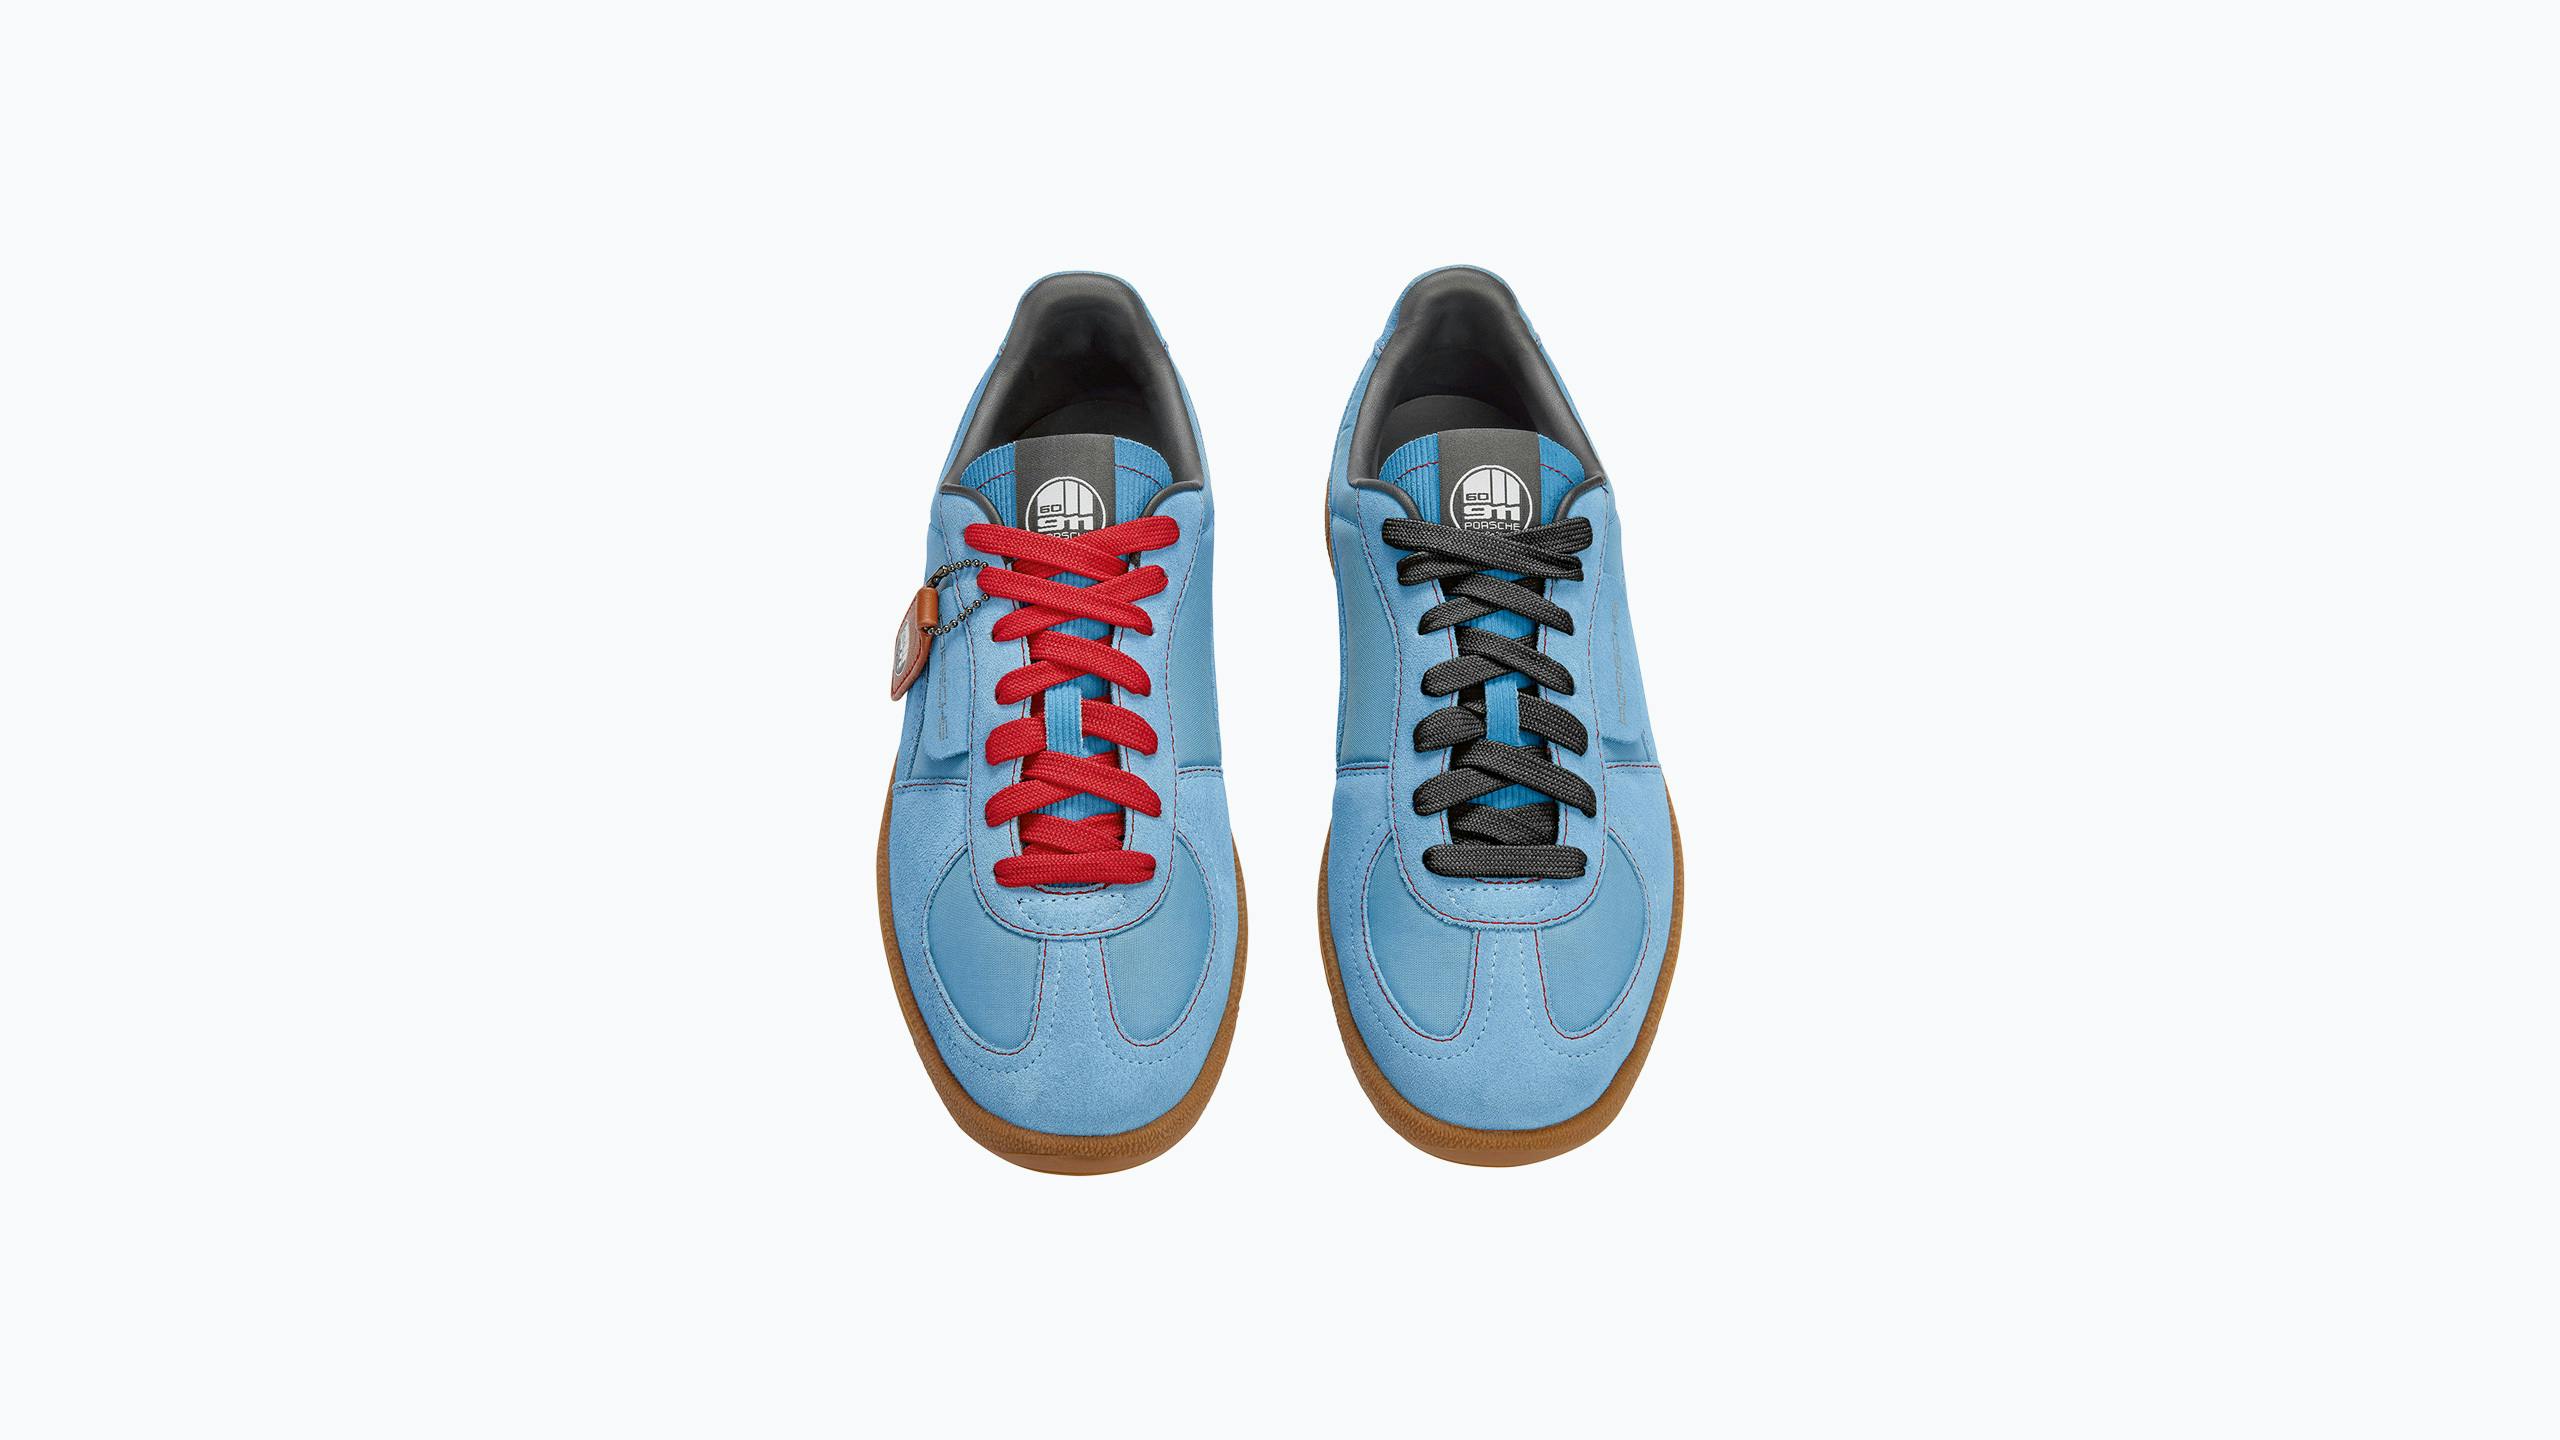 Pictured frontally is the light blue retro sneaker from Porsche in cooperation with Puma.